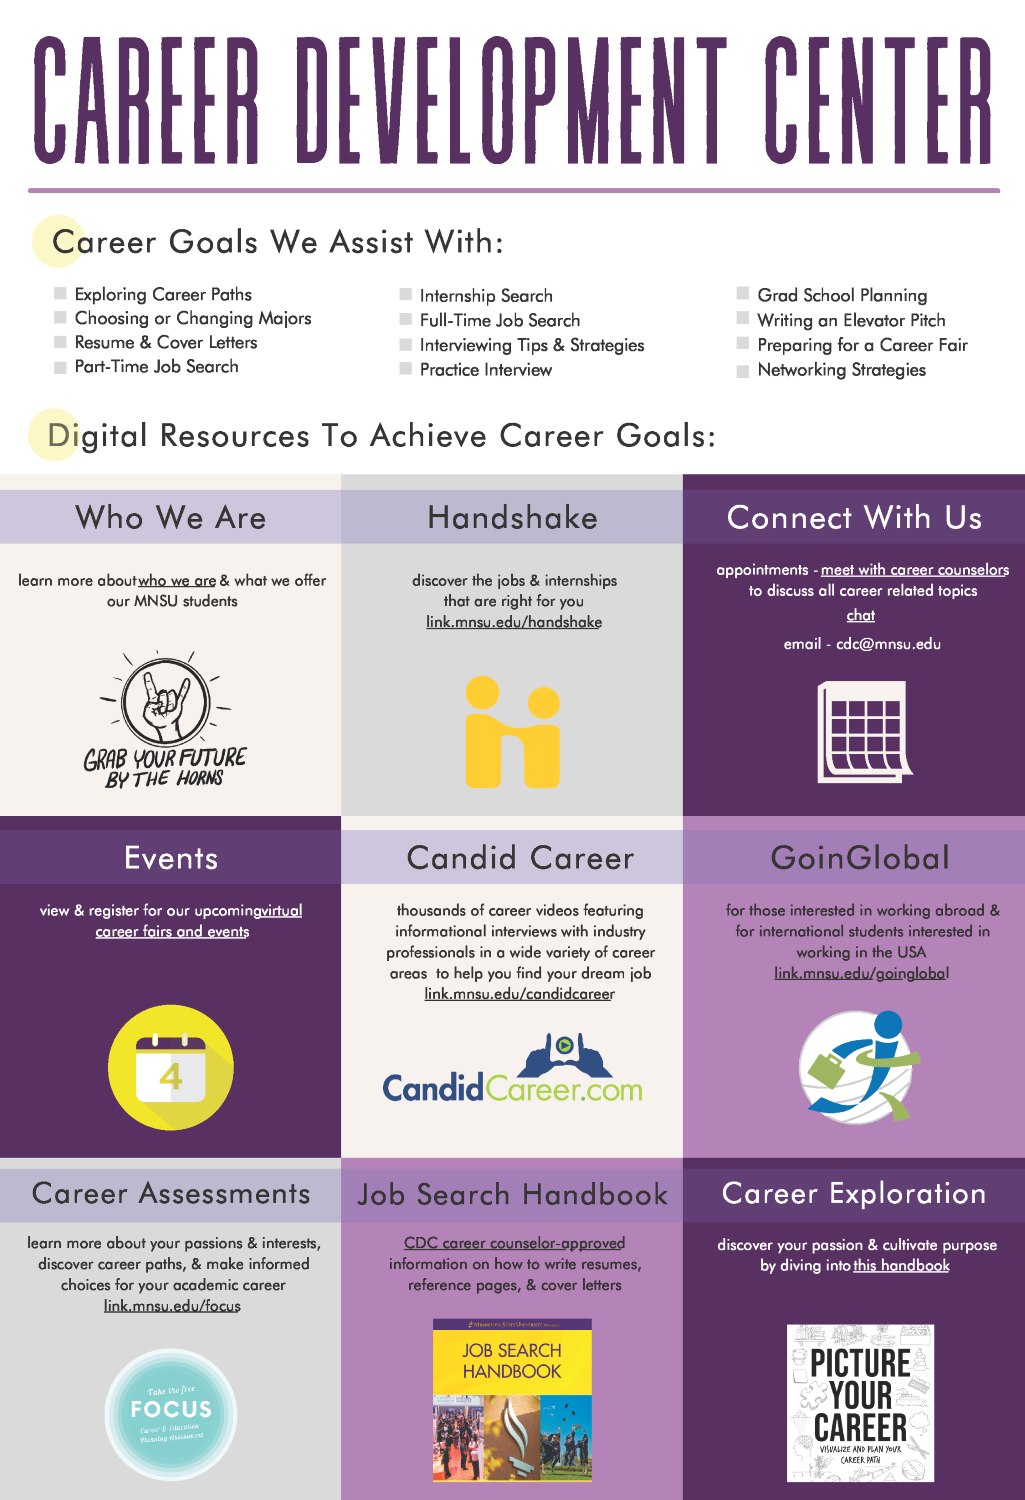 Career Development Center Information brochure which gives a brief overview of the types of assistance and digital resources students get to achieve career goals from the career development center 